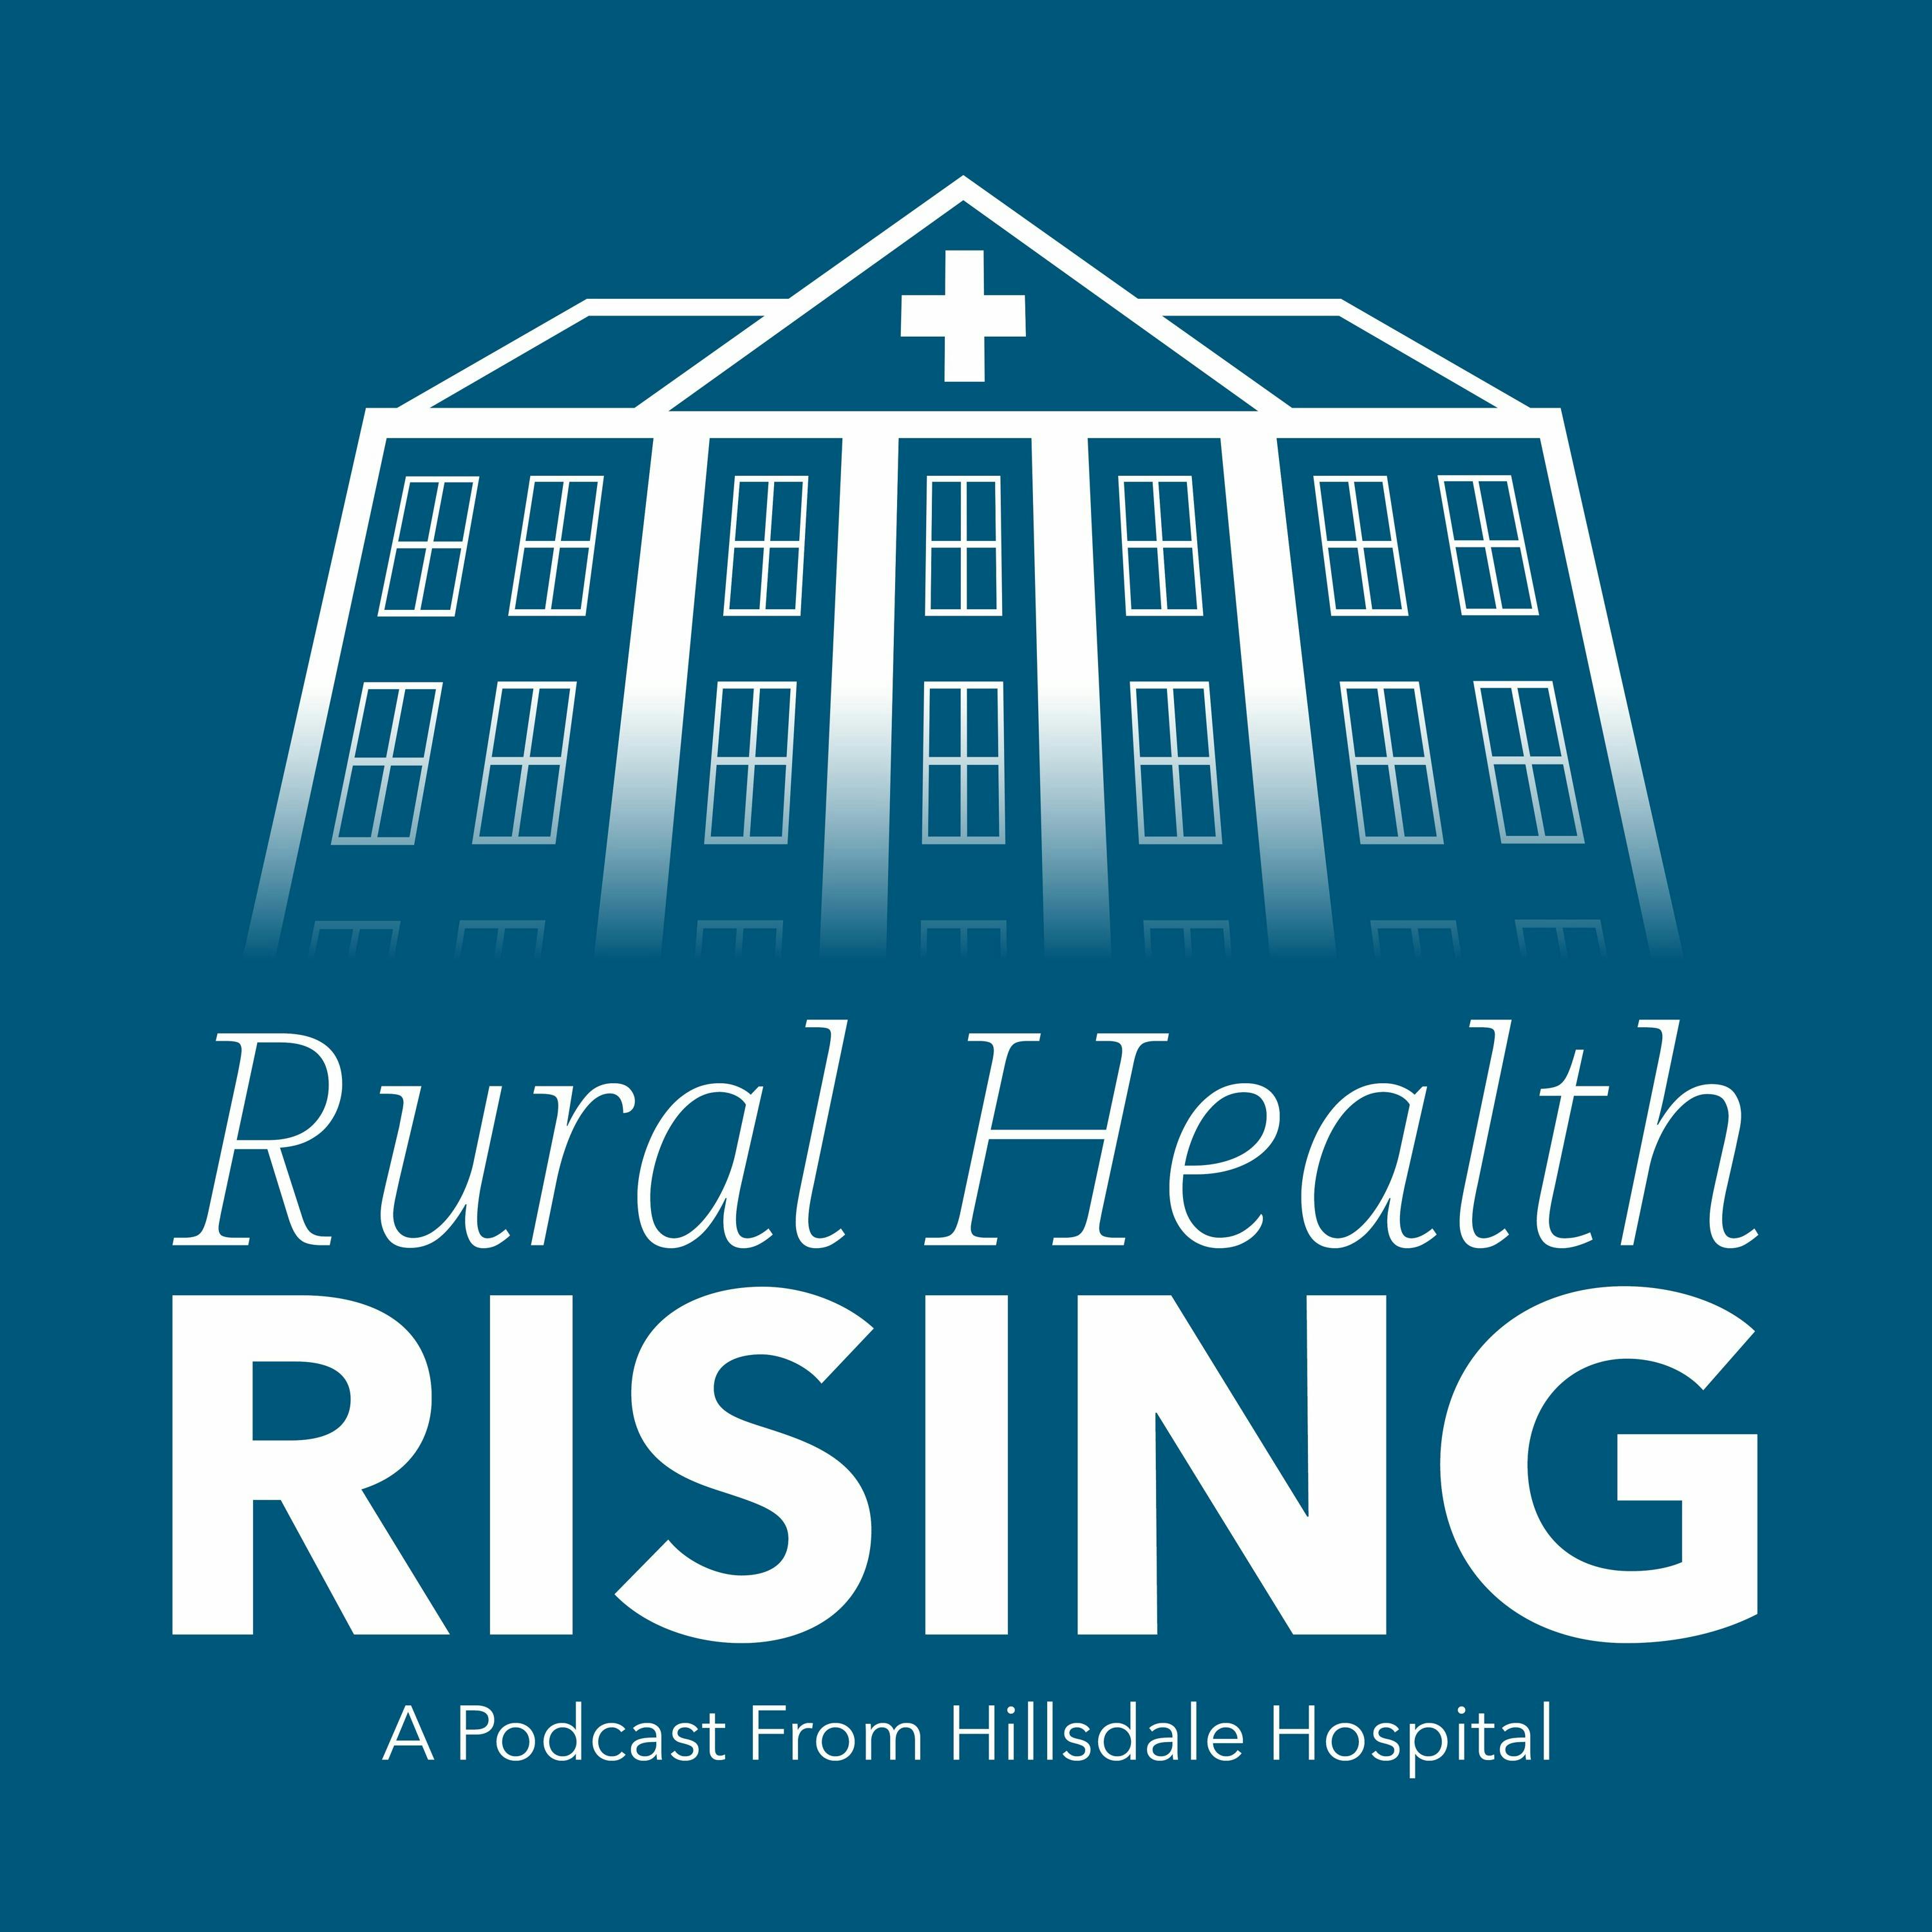 Episode 6: Partnerships in Specialty Care